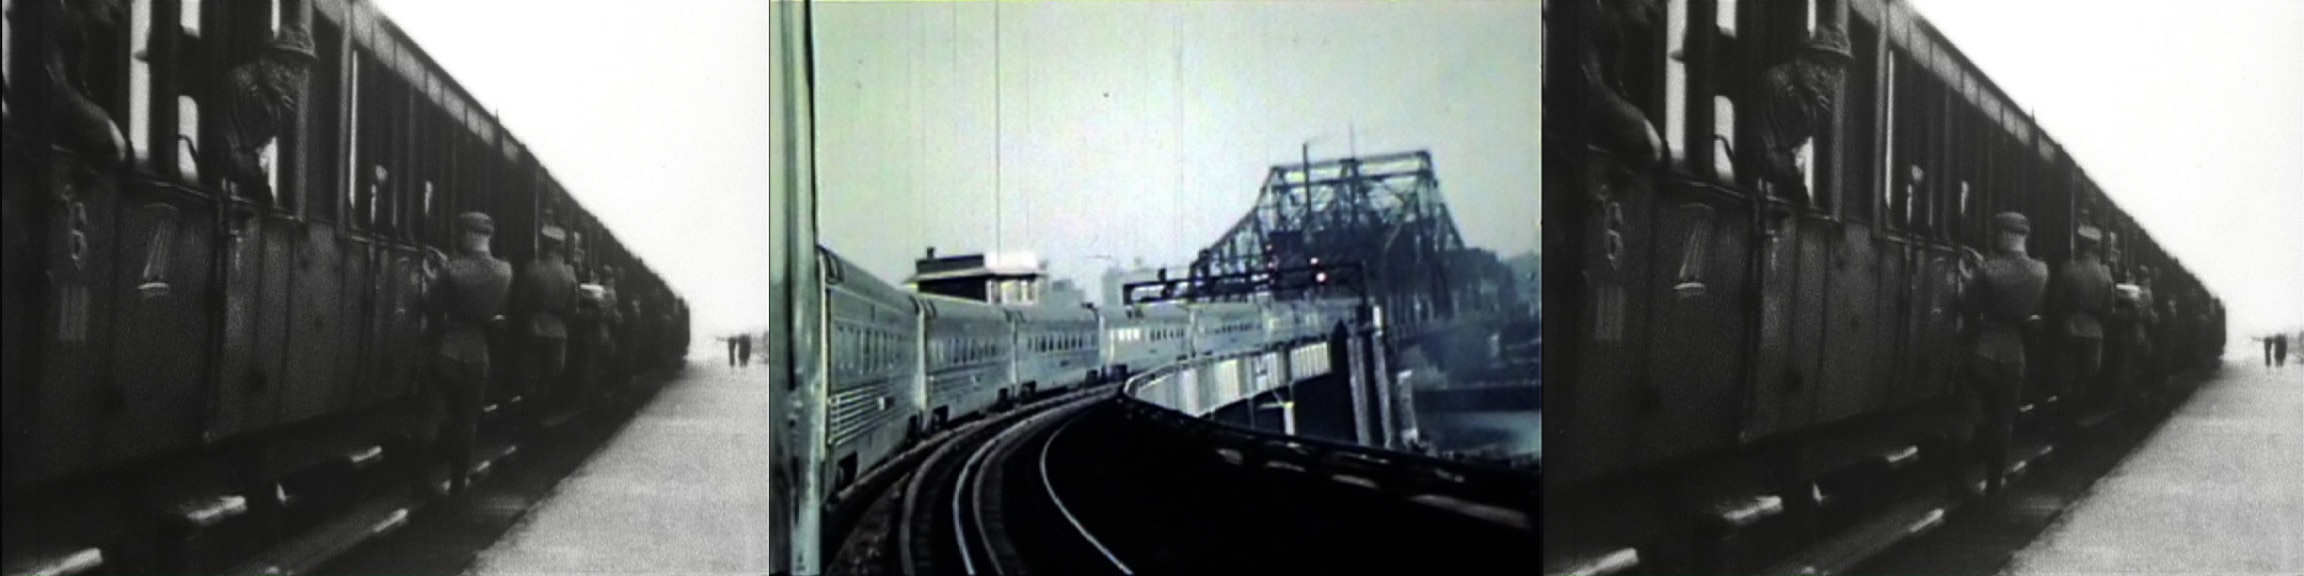 Video artwork Different Trains, shown at the BBVA Foundation